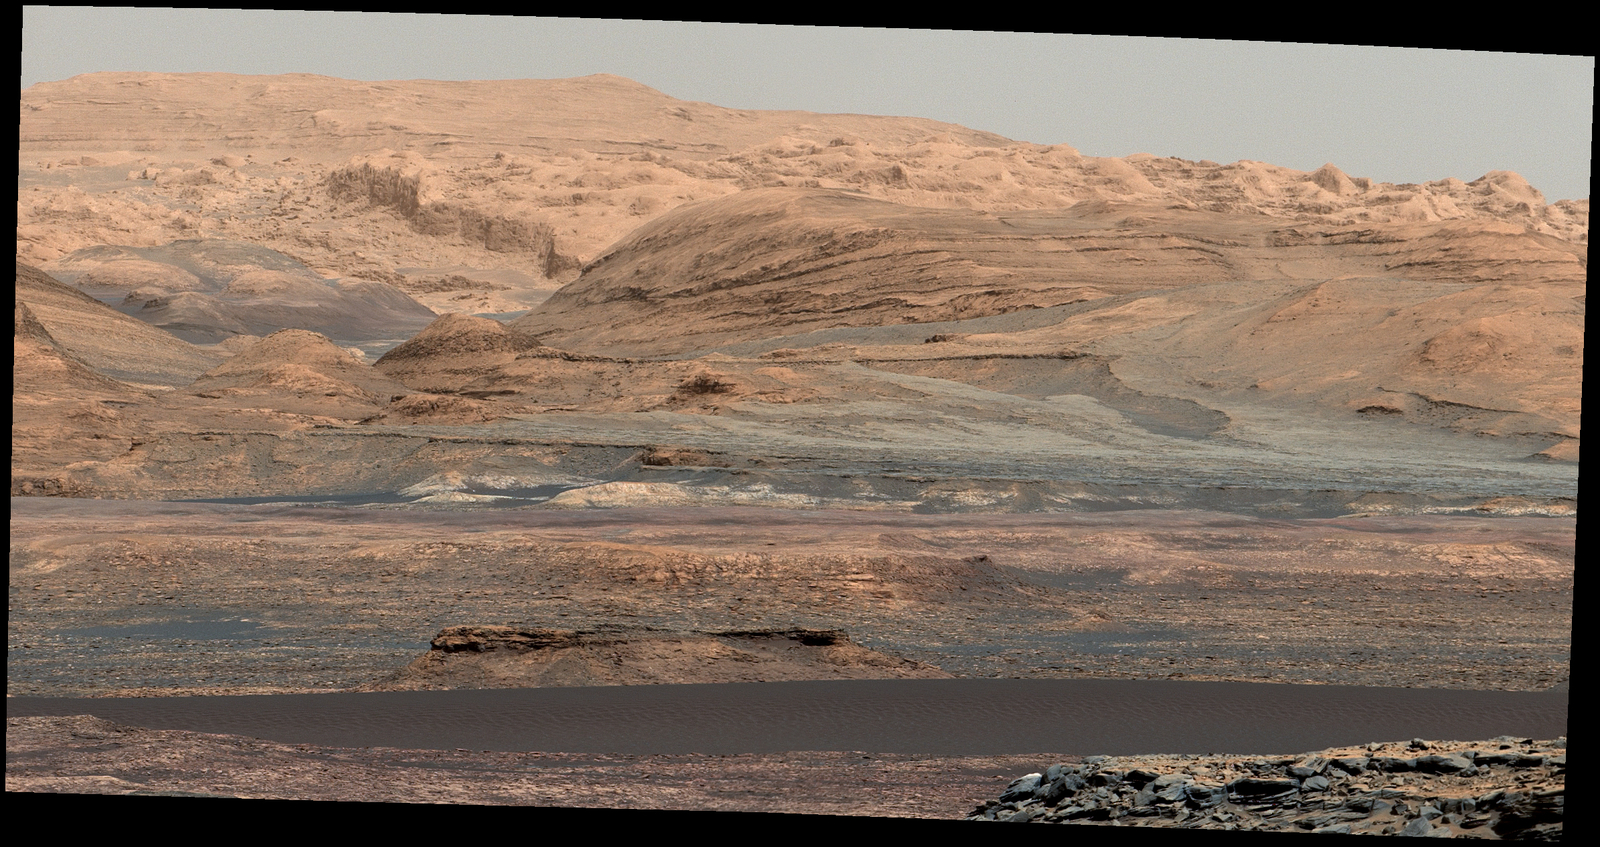 The dark band in the lower portion of this Martian scene is part of the "Bagnold Dunes" dune field lining the northwestern edge of Mount Sharp. The scene combines multiple images taken with the Mast Camera on NASA's Curiosity Mars rover on Sept. 25, 2015. The view is toward south-southeast.